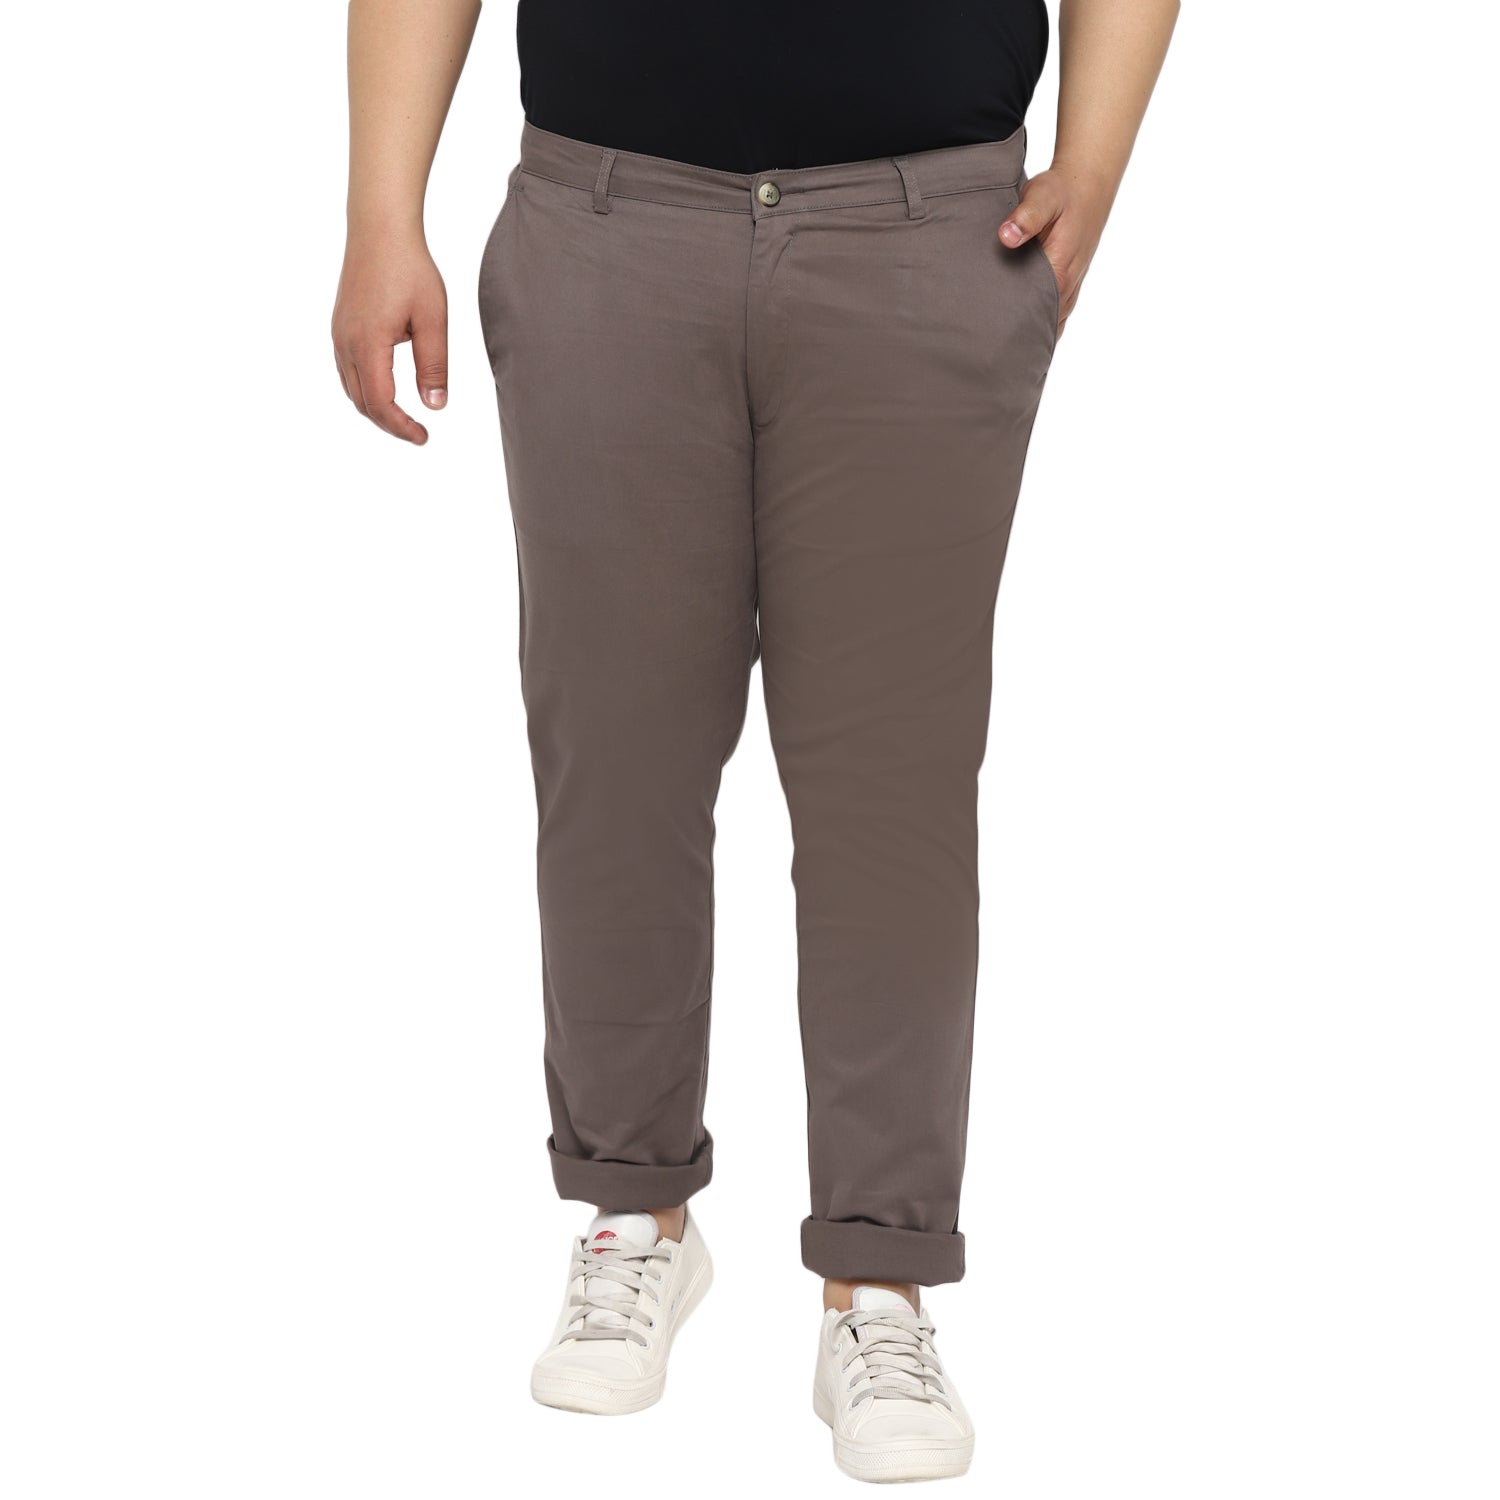 Men's Dark Grey Cotton Regular Fit Casual Chinos Trousers Stretch